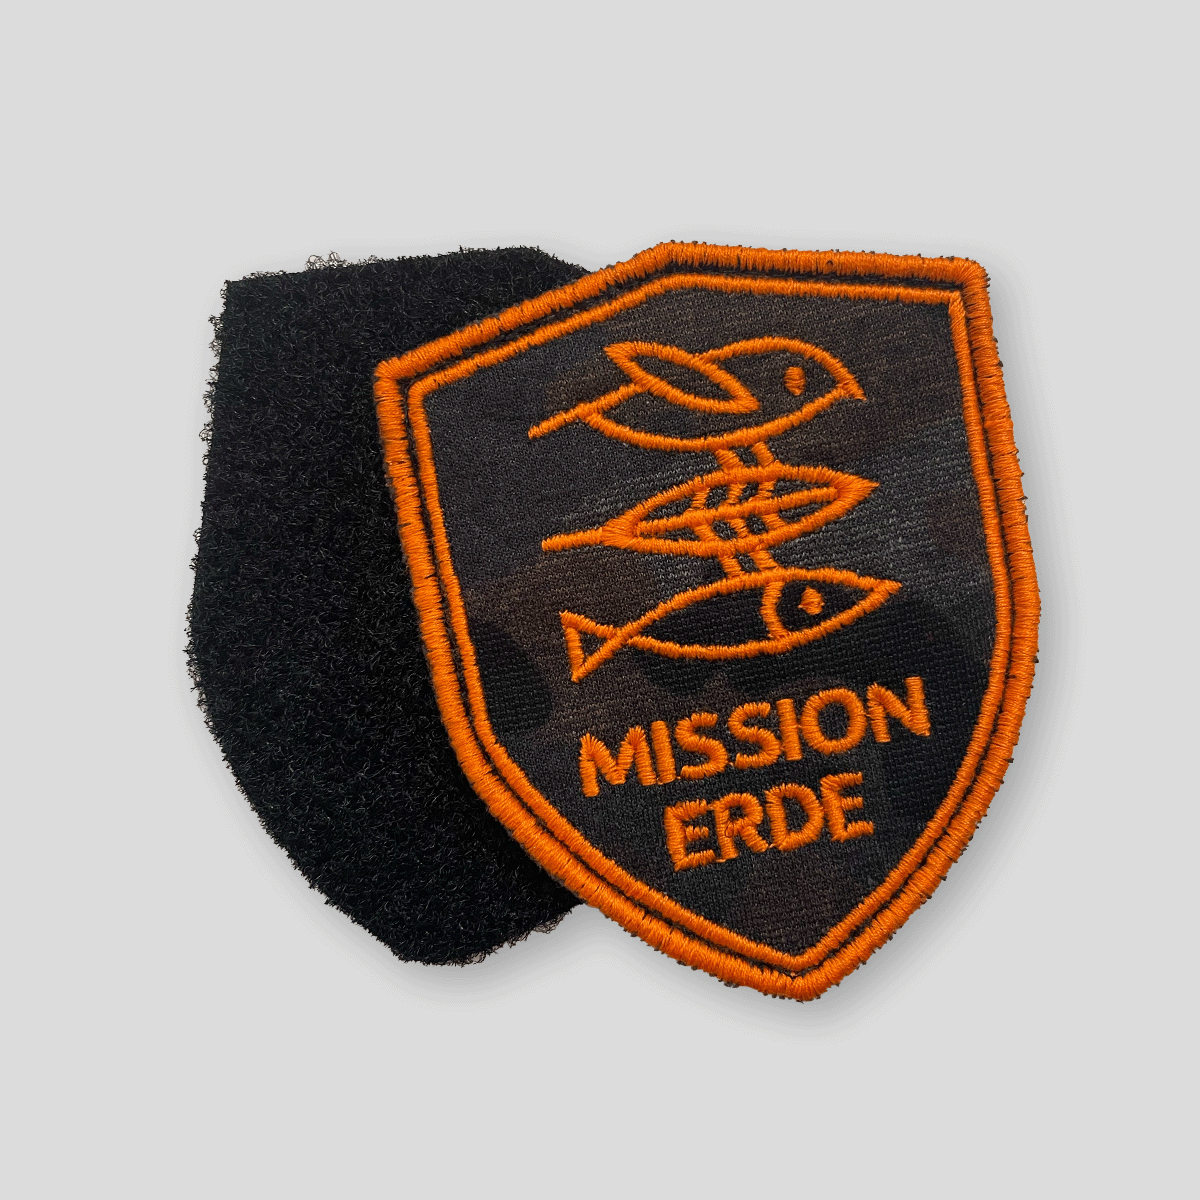 Patch "Mission Erde" Camouflage